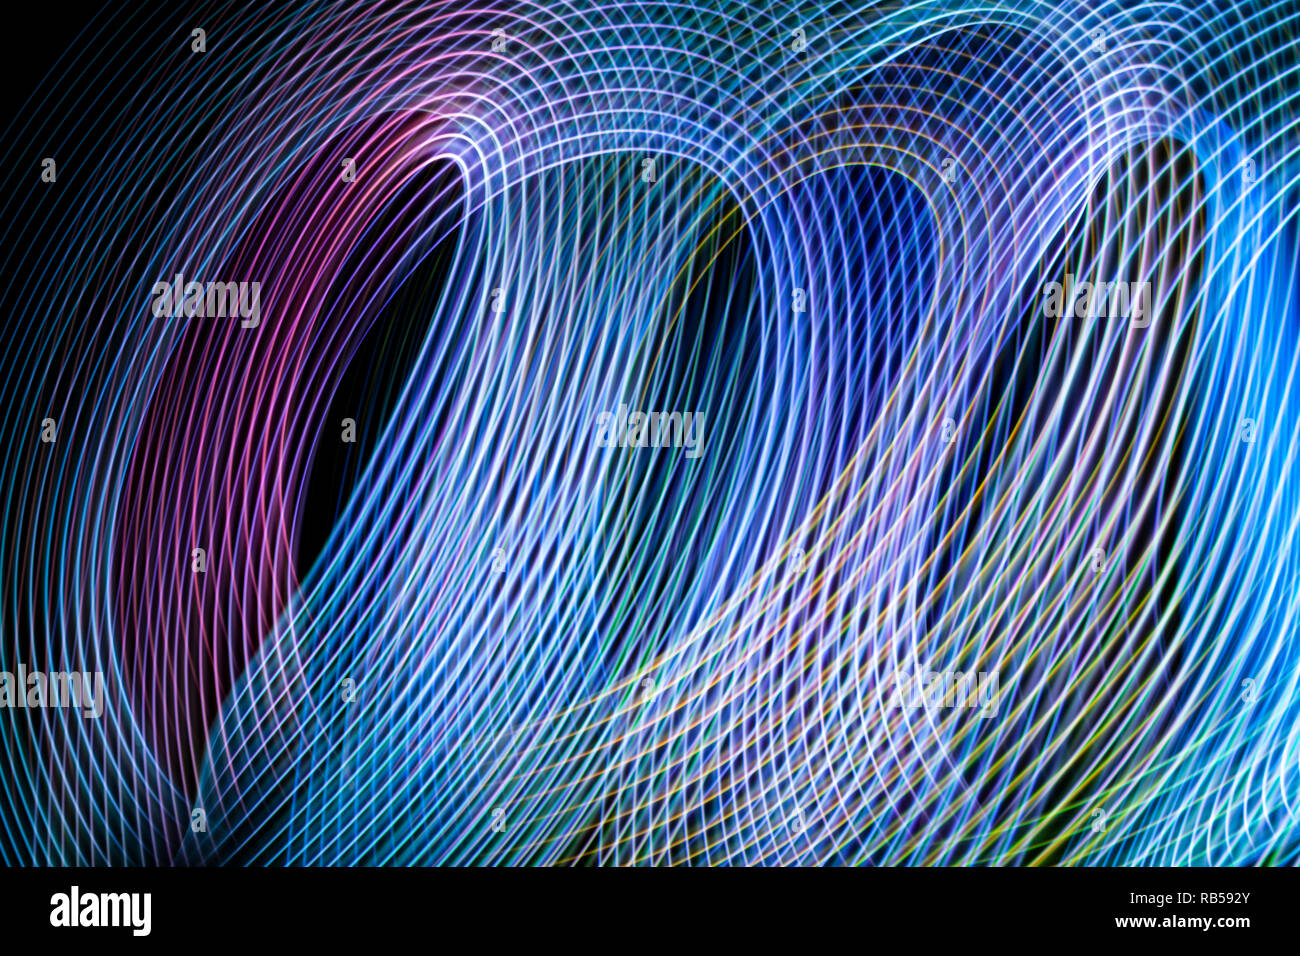 Abstract background with glitch effect design Stock Photo - Alamy